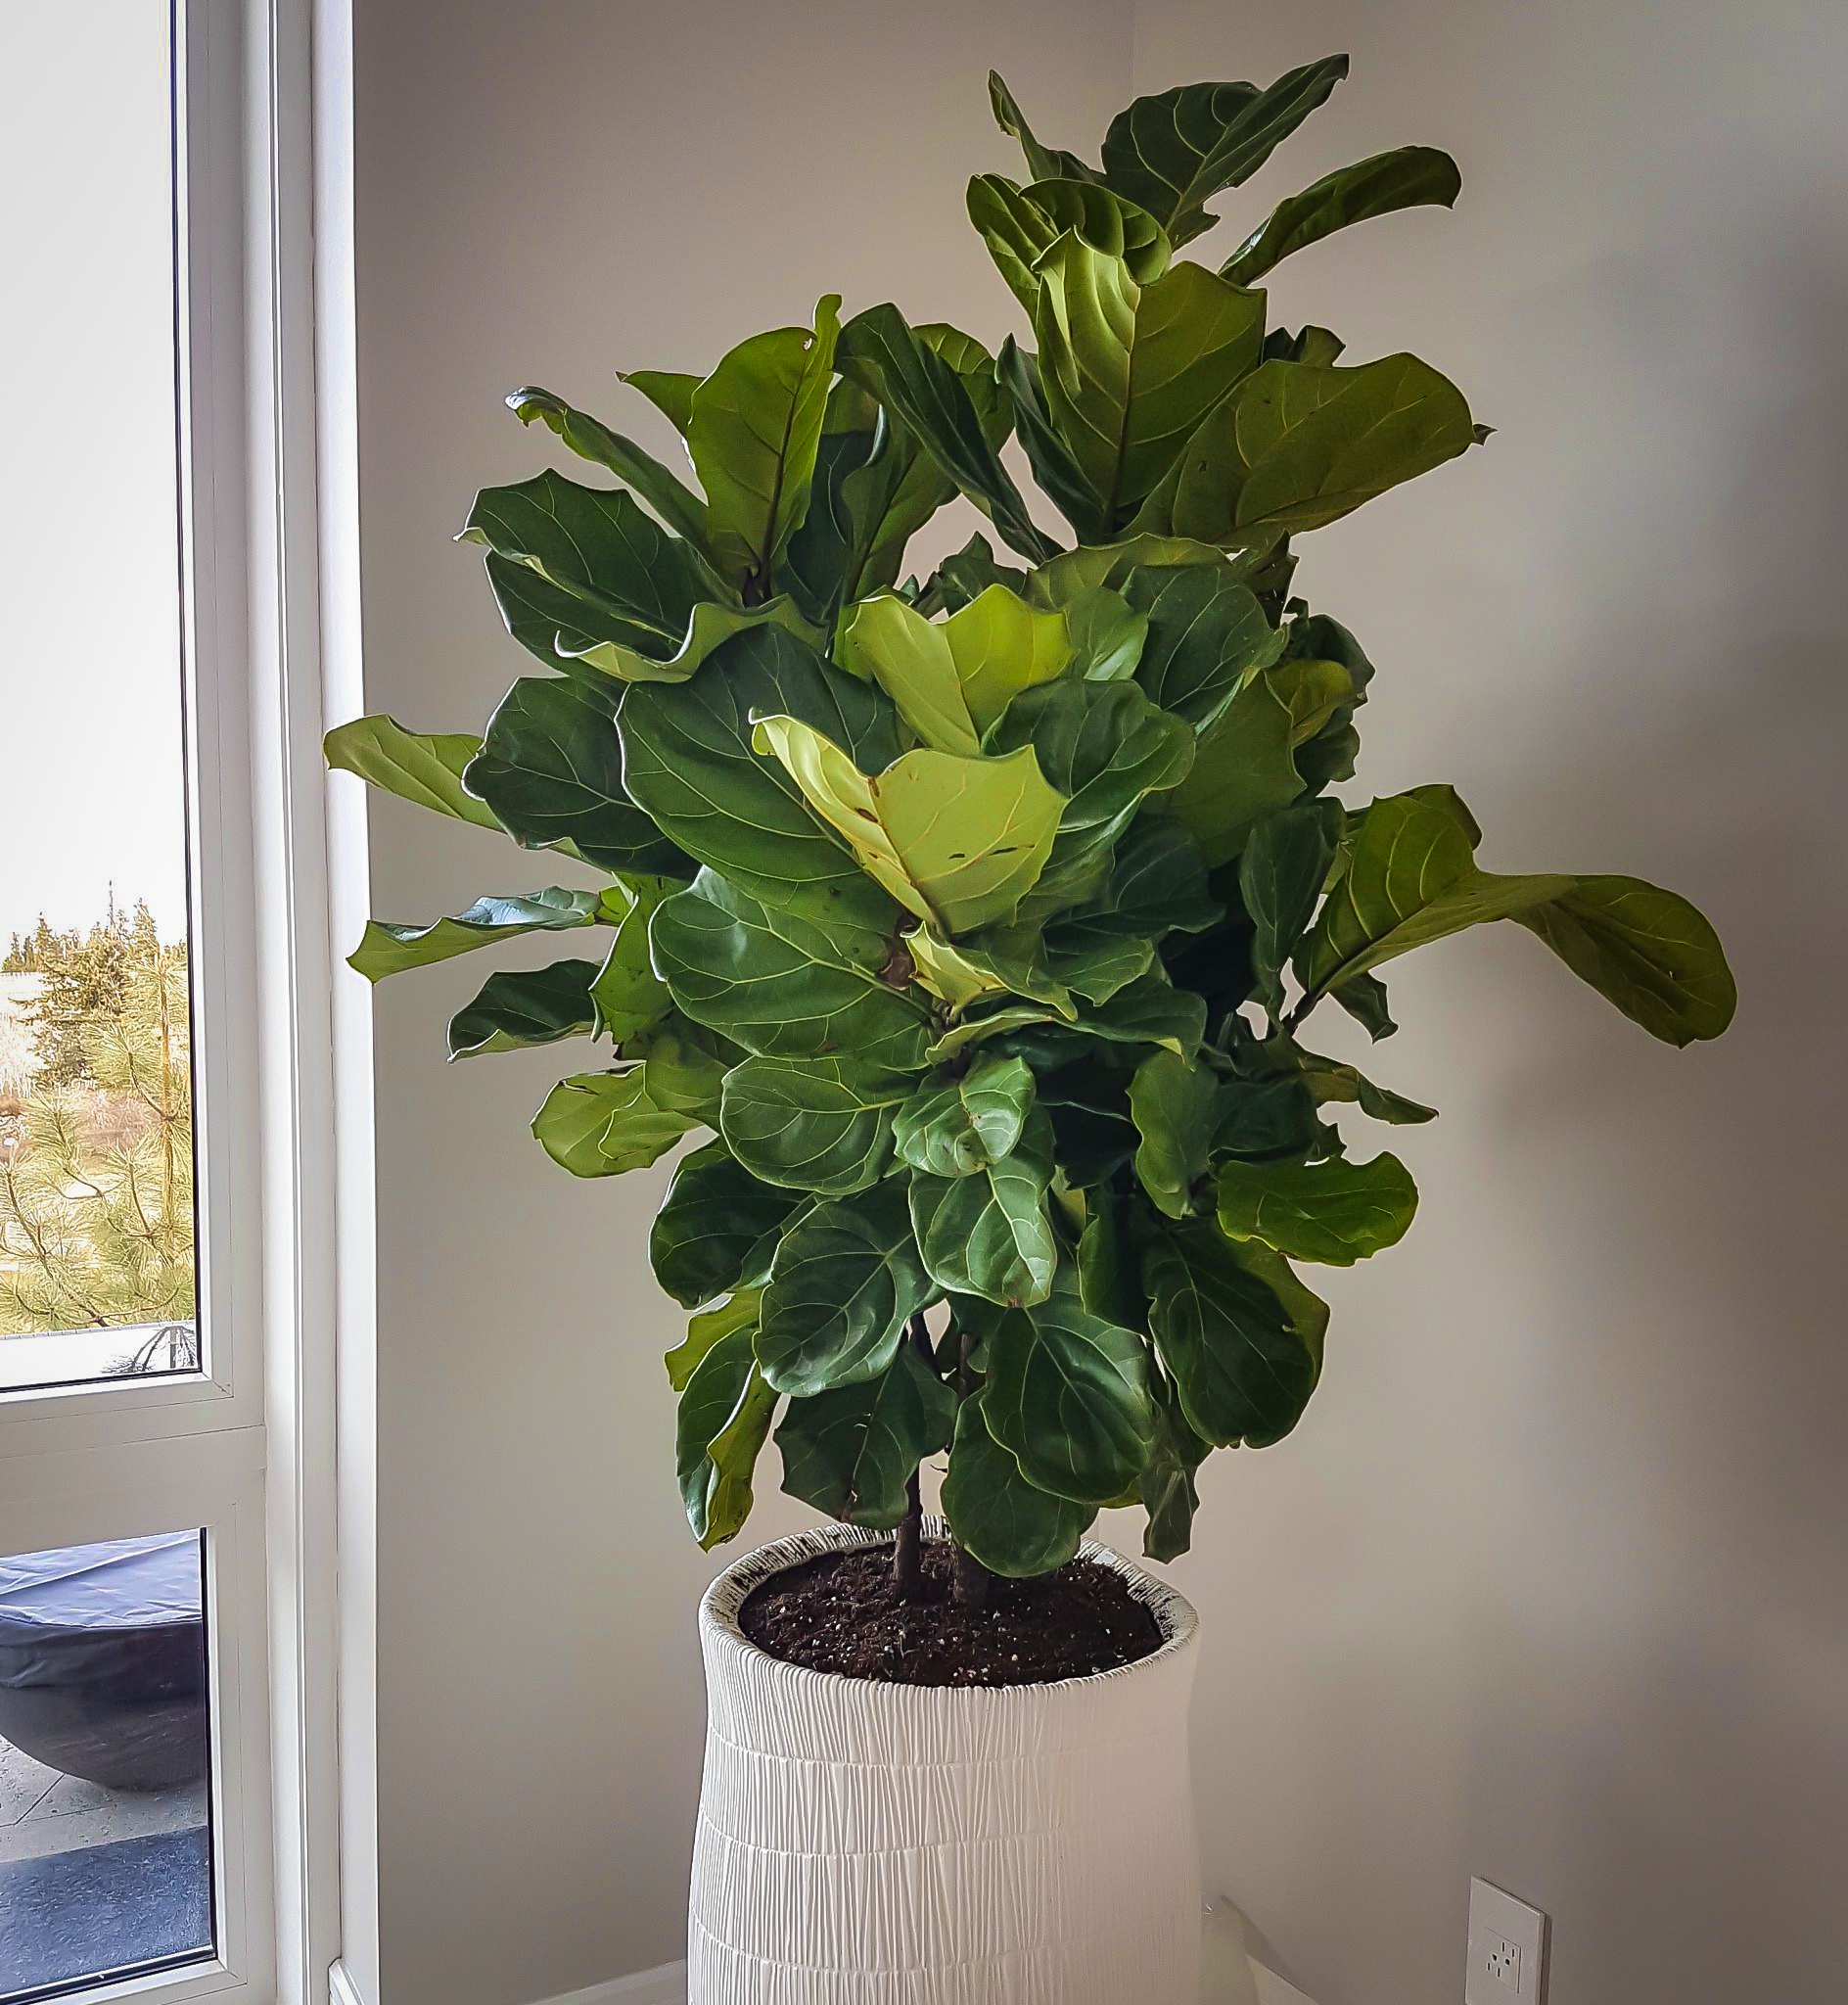 Fiddle Leaf Fig Bush For Sale The Tree Center,Easy Meatball Recipe No Breadcrumbs